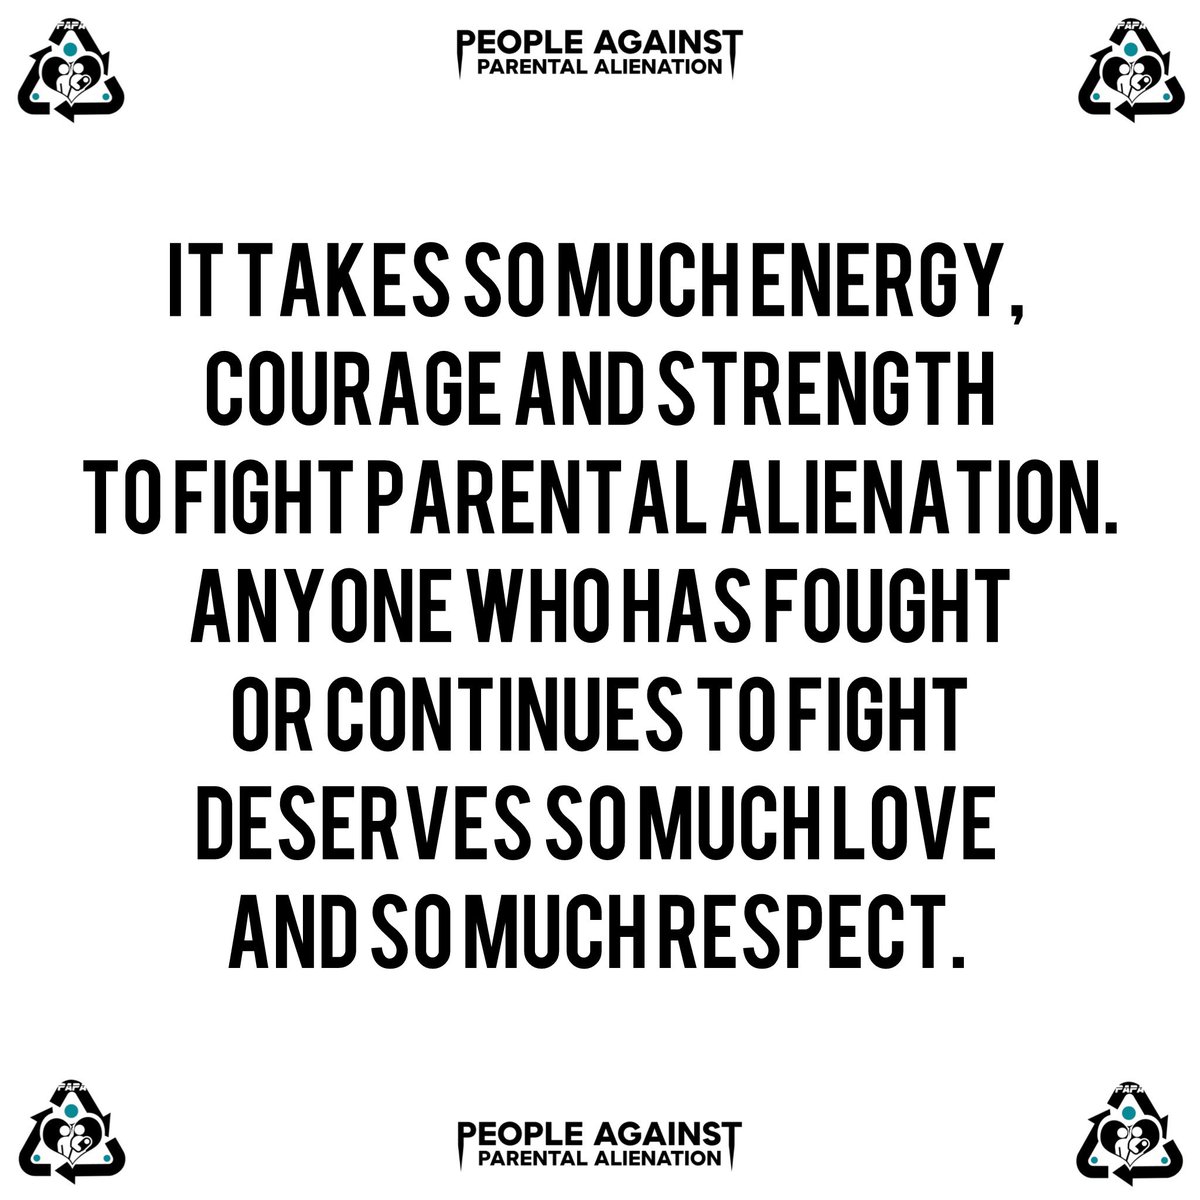 You guys are warriors and should stand tall and proud for what you endure to be there for your children. Just a reminder that you all inspire me to keep going on this journey with PAPA. 💪❤️♻️ #papa #peopleagainstparentalalienation #parentalalienation #familylaw #familycourt